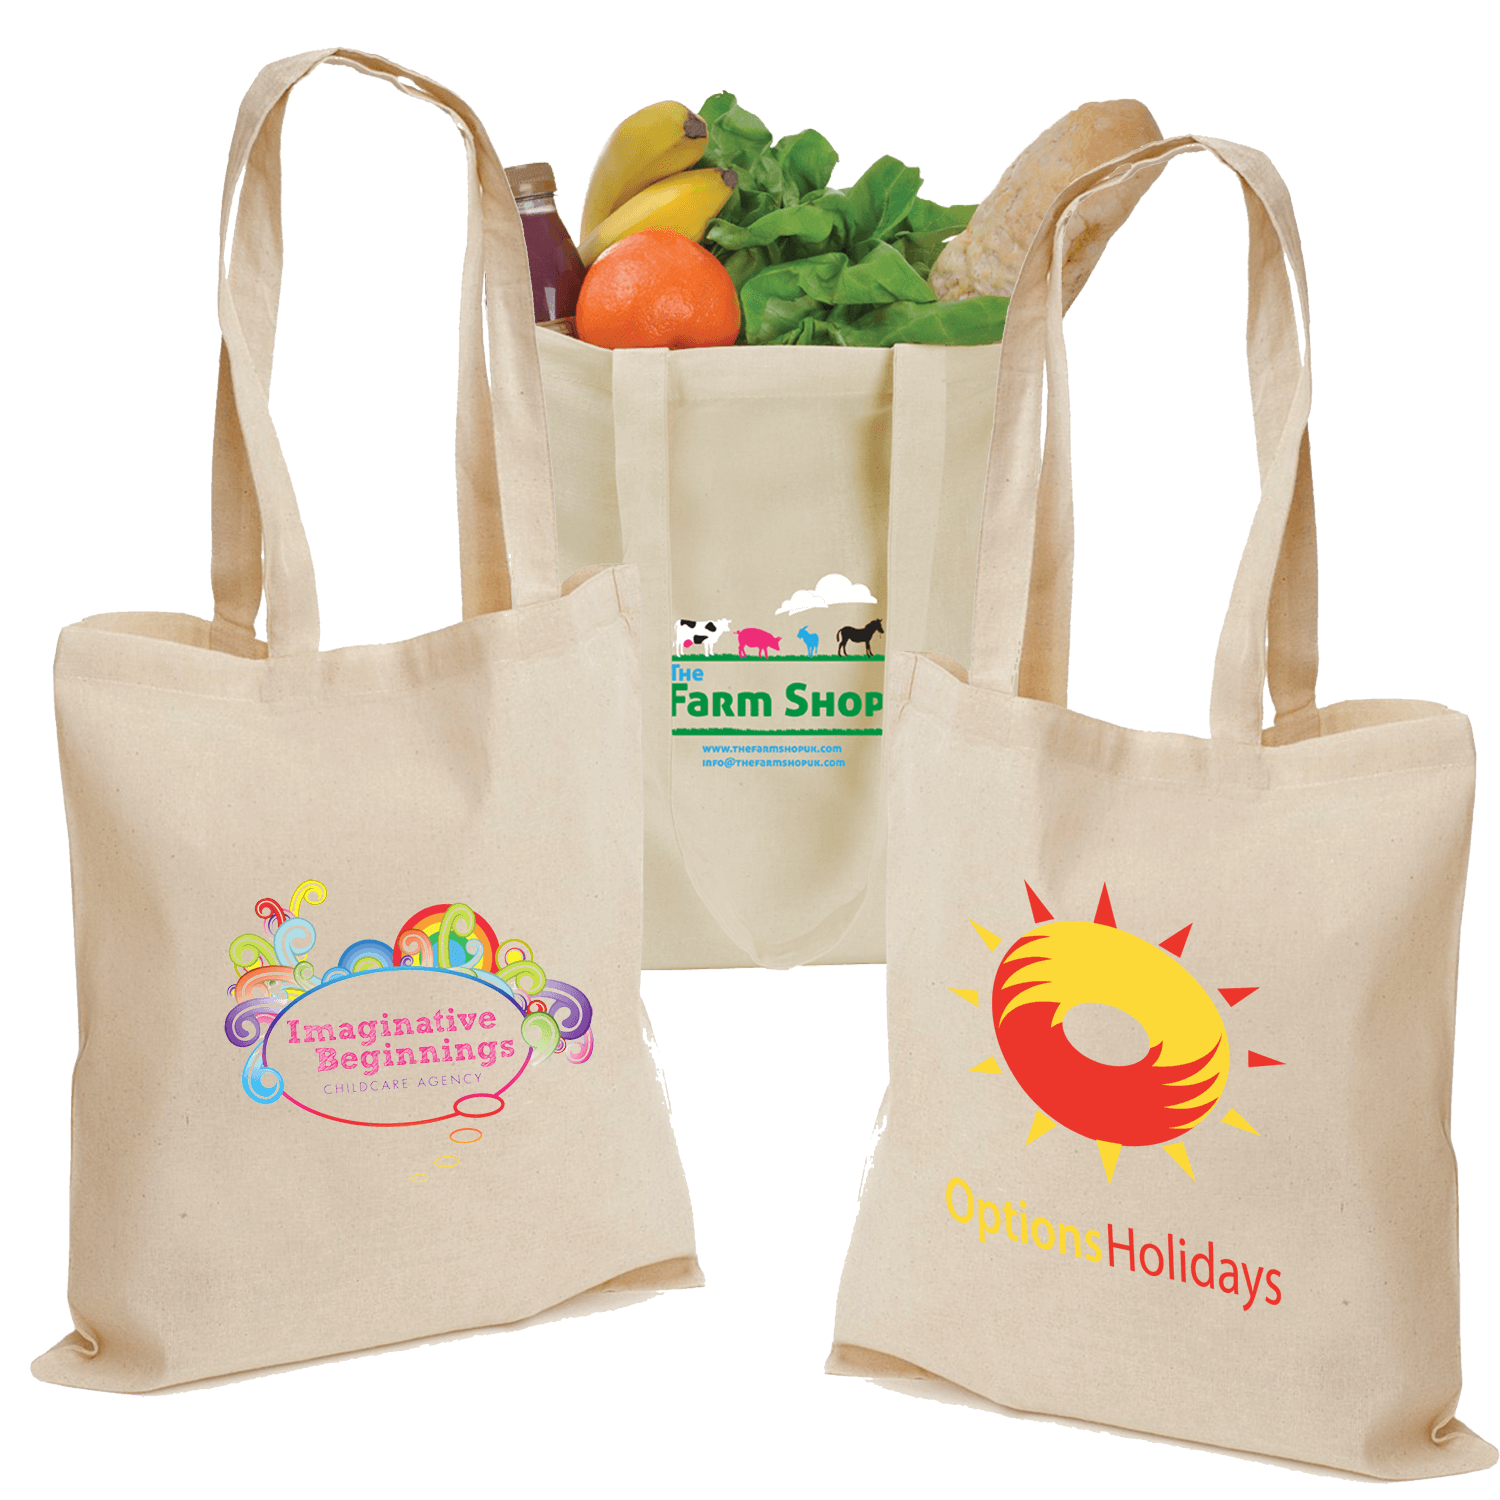 Branded Reusable Shopper & Tote Bags| Price Guarantee | order online ...